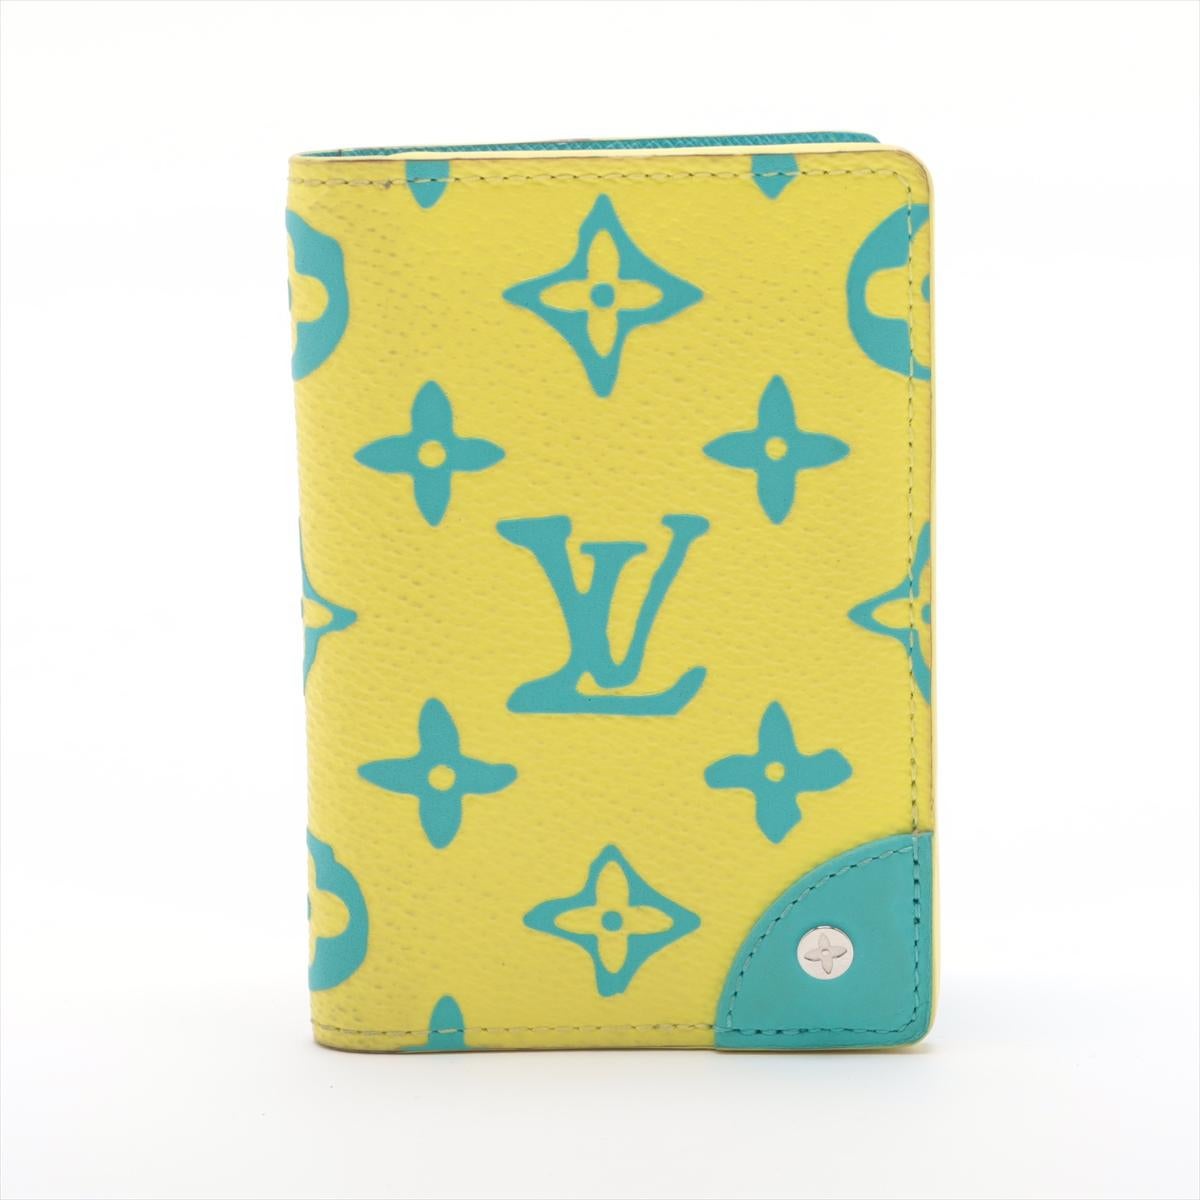 The Louis Vuitton Yellow Playground Monogram Pocket Organizer Case is a vibrant and playful accessory that infuses a pop of color into the iconic monogram design. Crafted with meticulous attention to detail, the pocket organizer features the classic